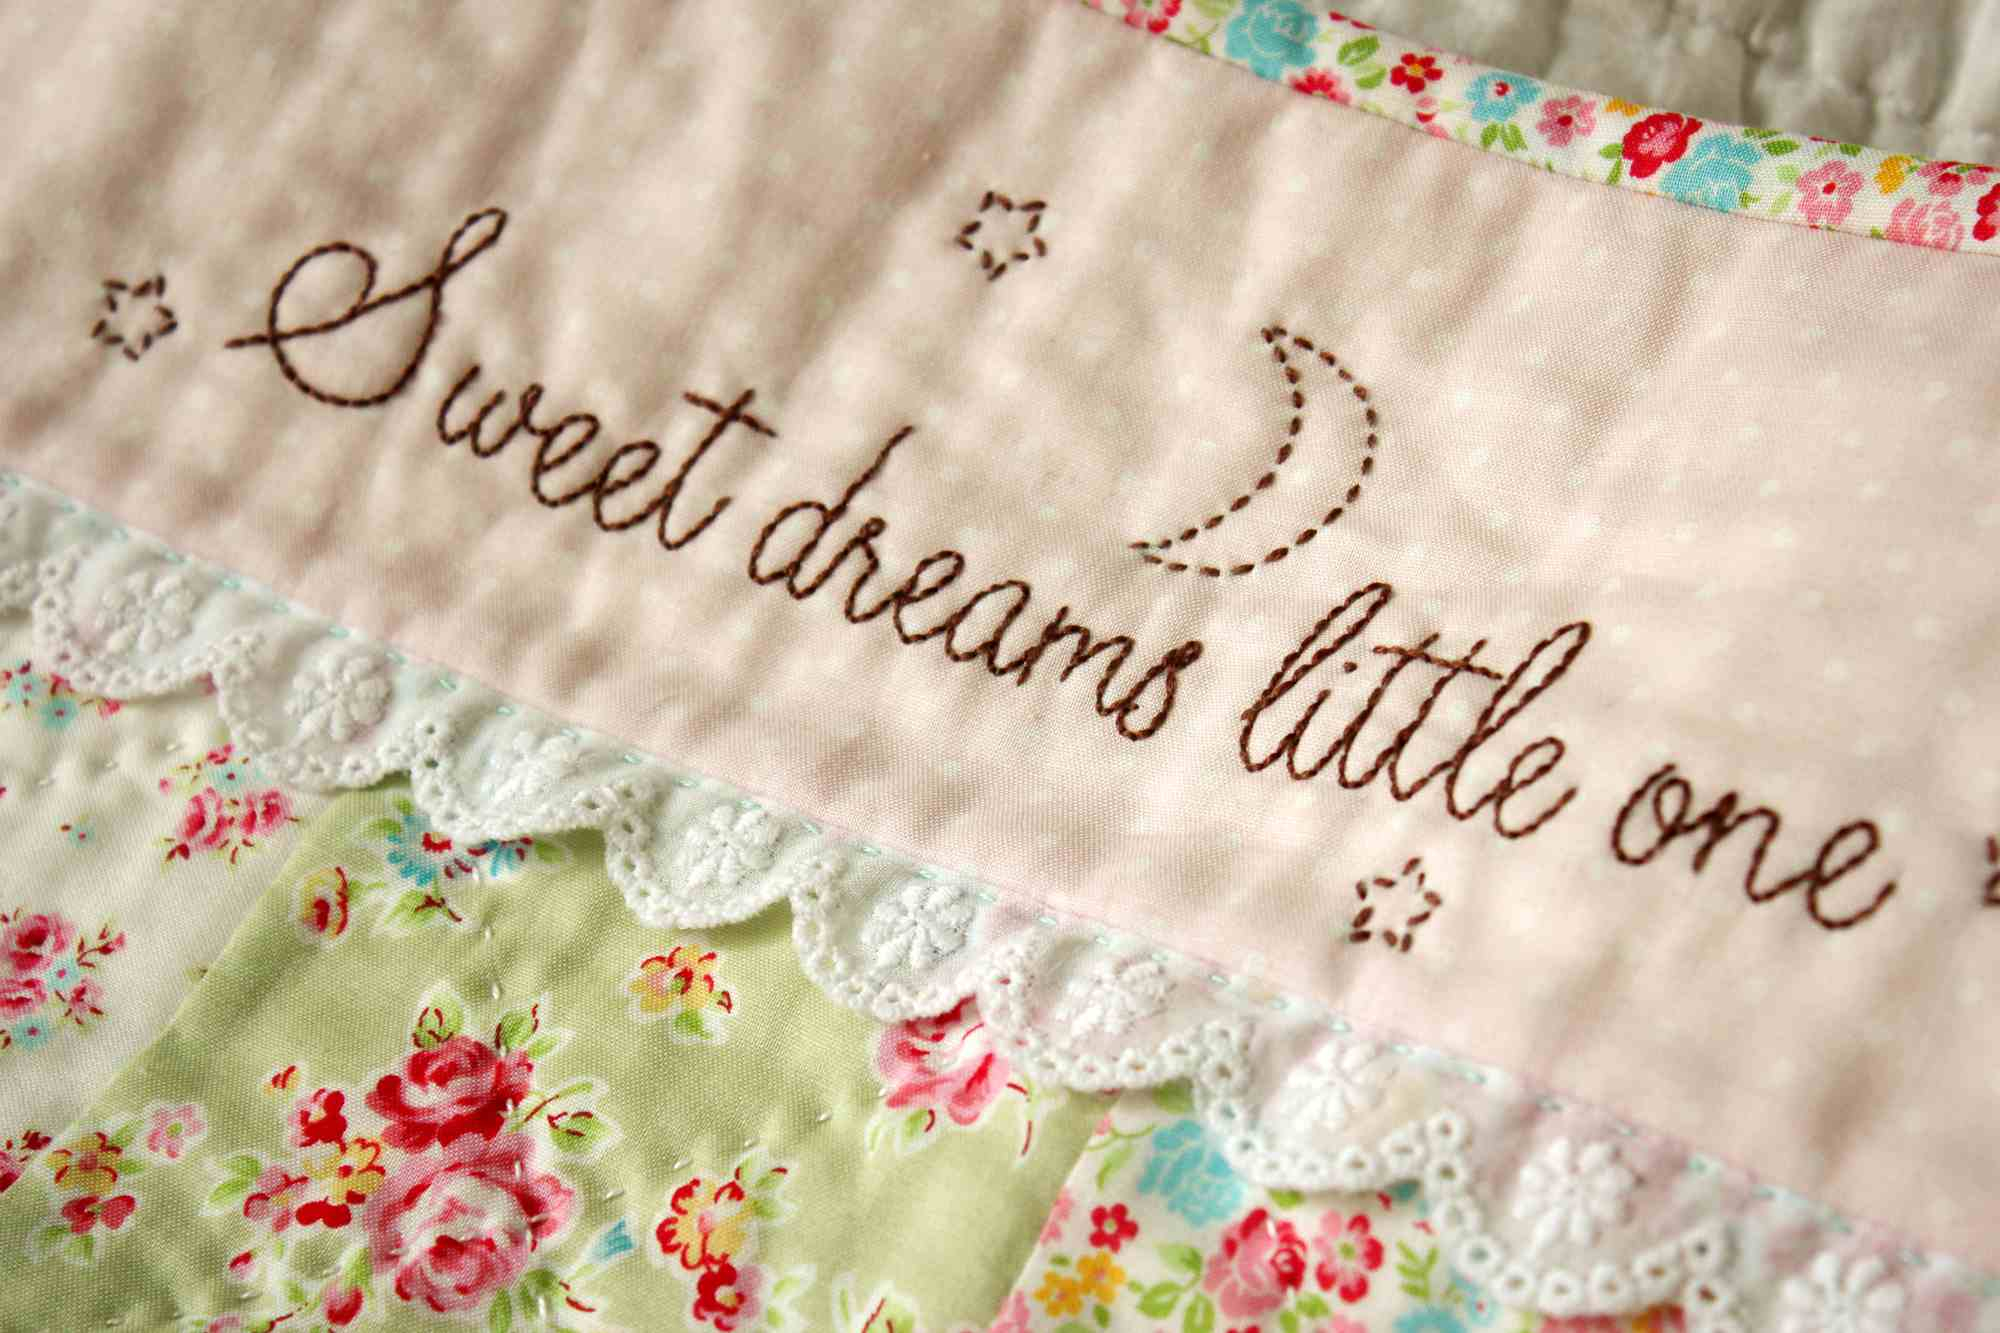 Hand Embroidery Patterns For Baby Quilts 10 Hand Embroidery Patterns For A New Ba Or Nursery